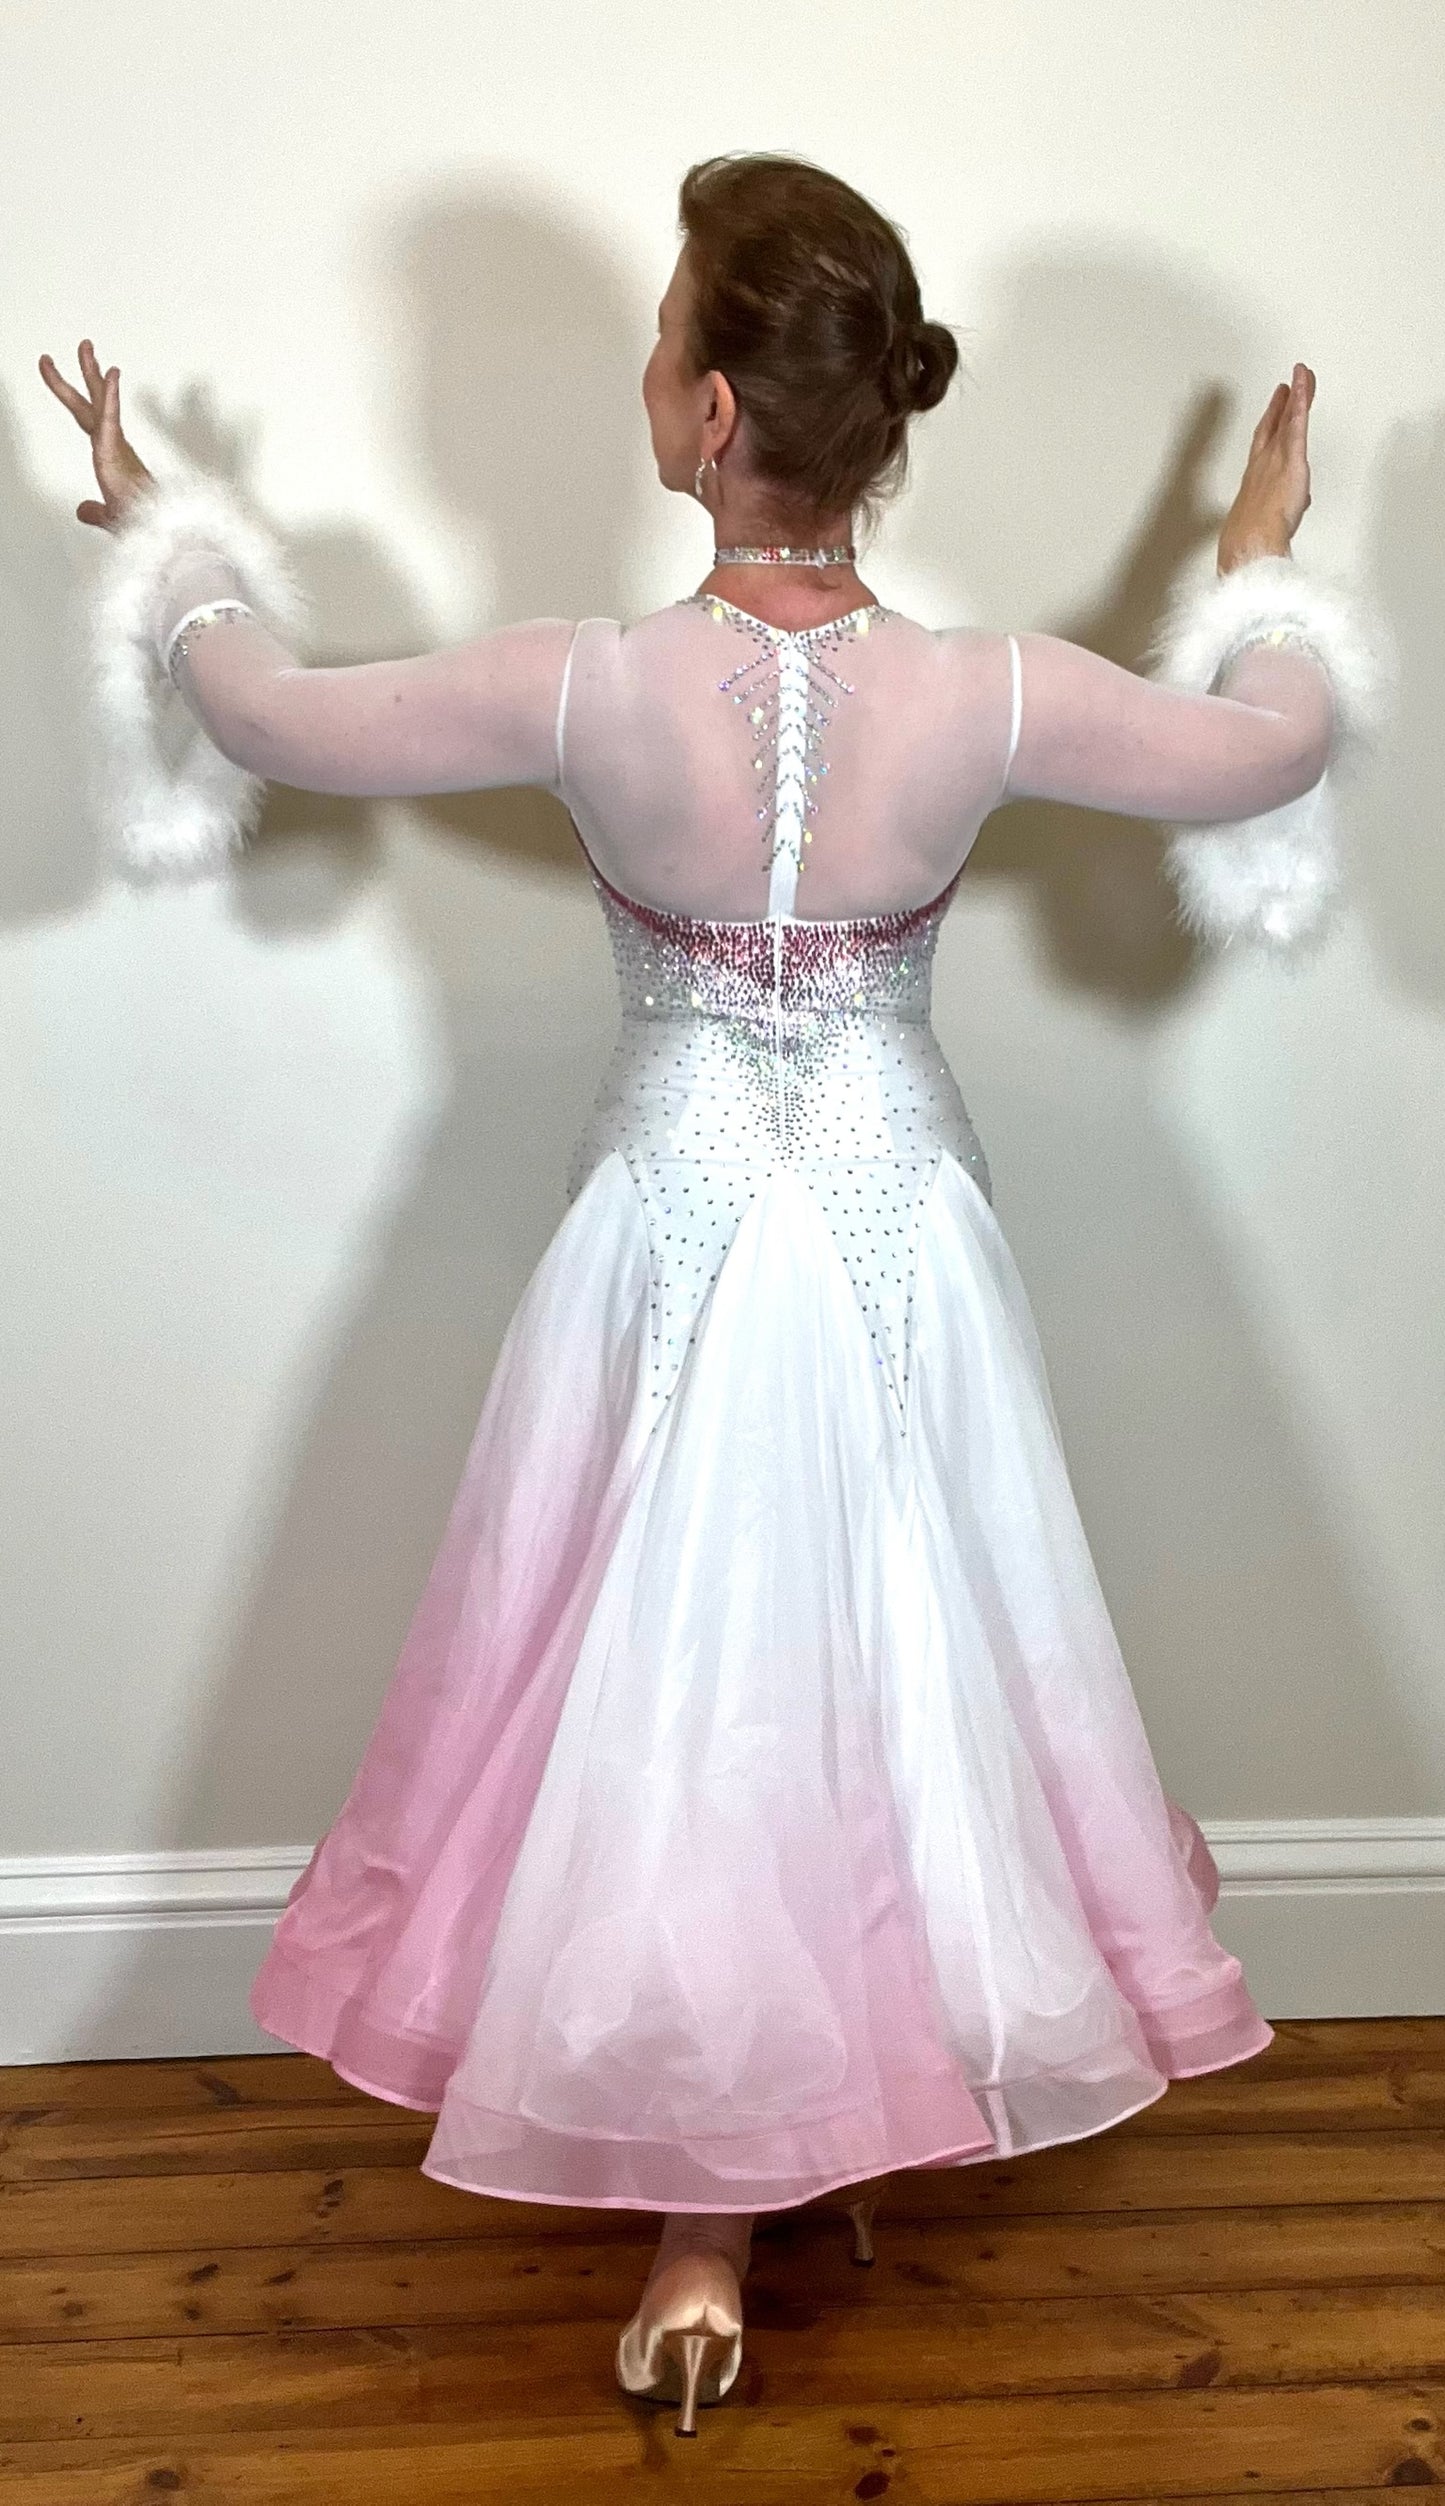 207 Pale Pink & White Ombré Ballroom Dress. Scoop neck & High mesh back. Feature stoning at the chest in rose, light rose & AB. Feather detailing to bell sleeves.